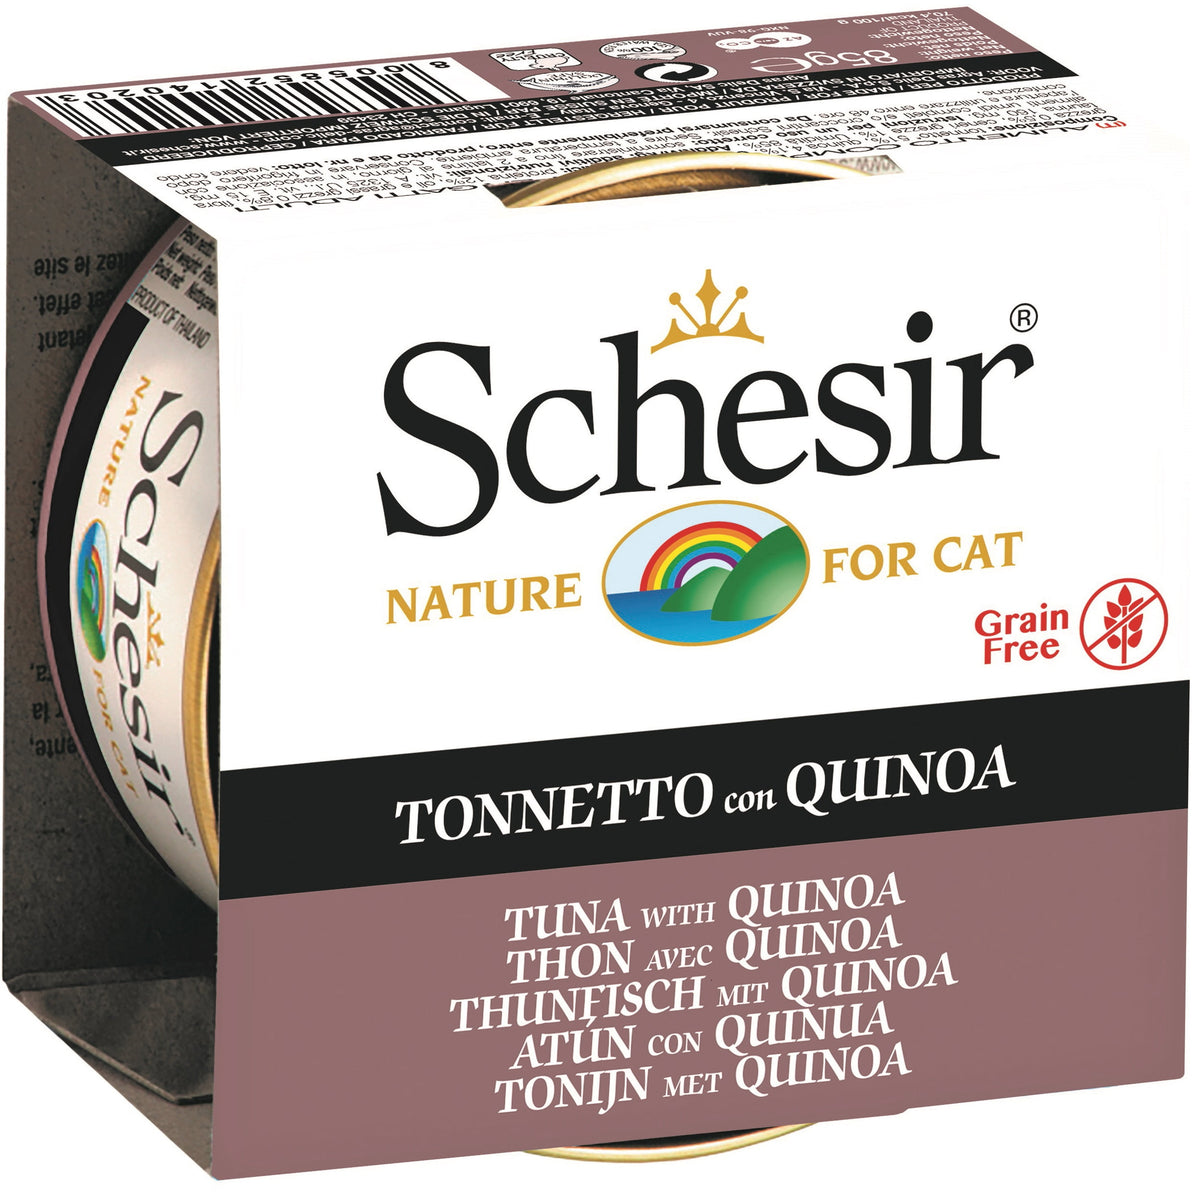 Schesir Tuna with Quinoa (85g) - Canned Cat Food